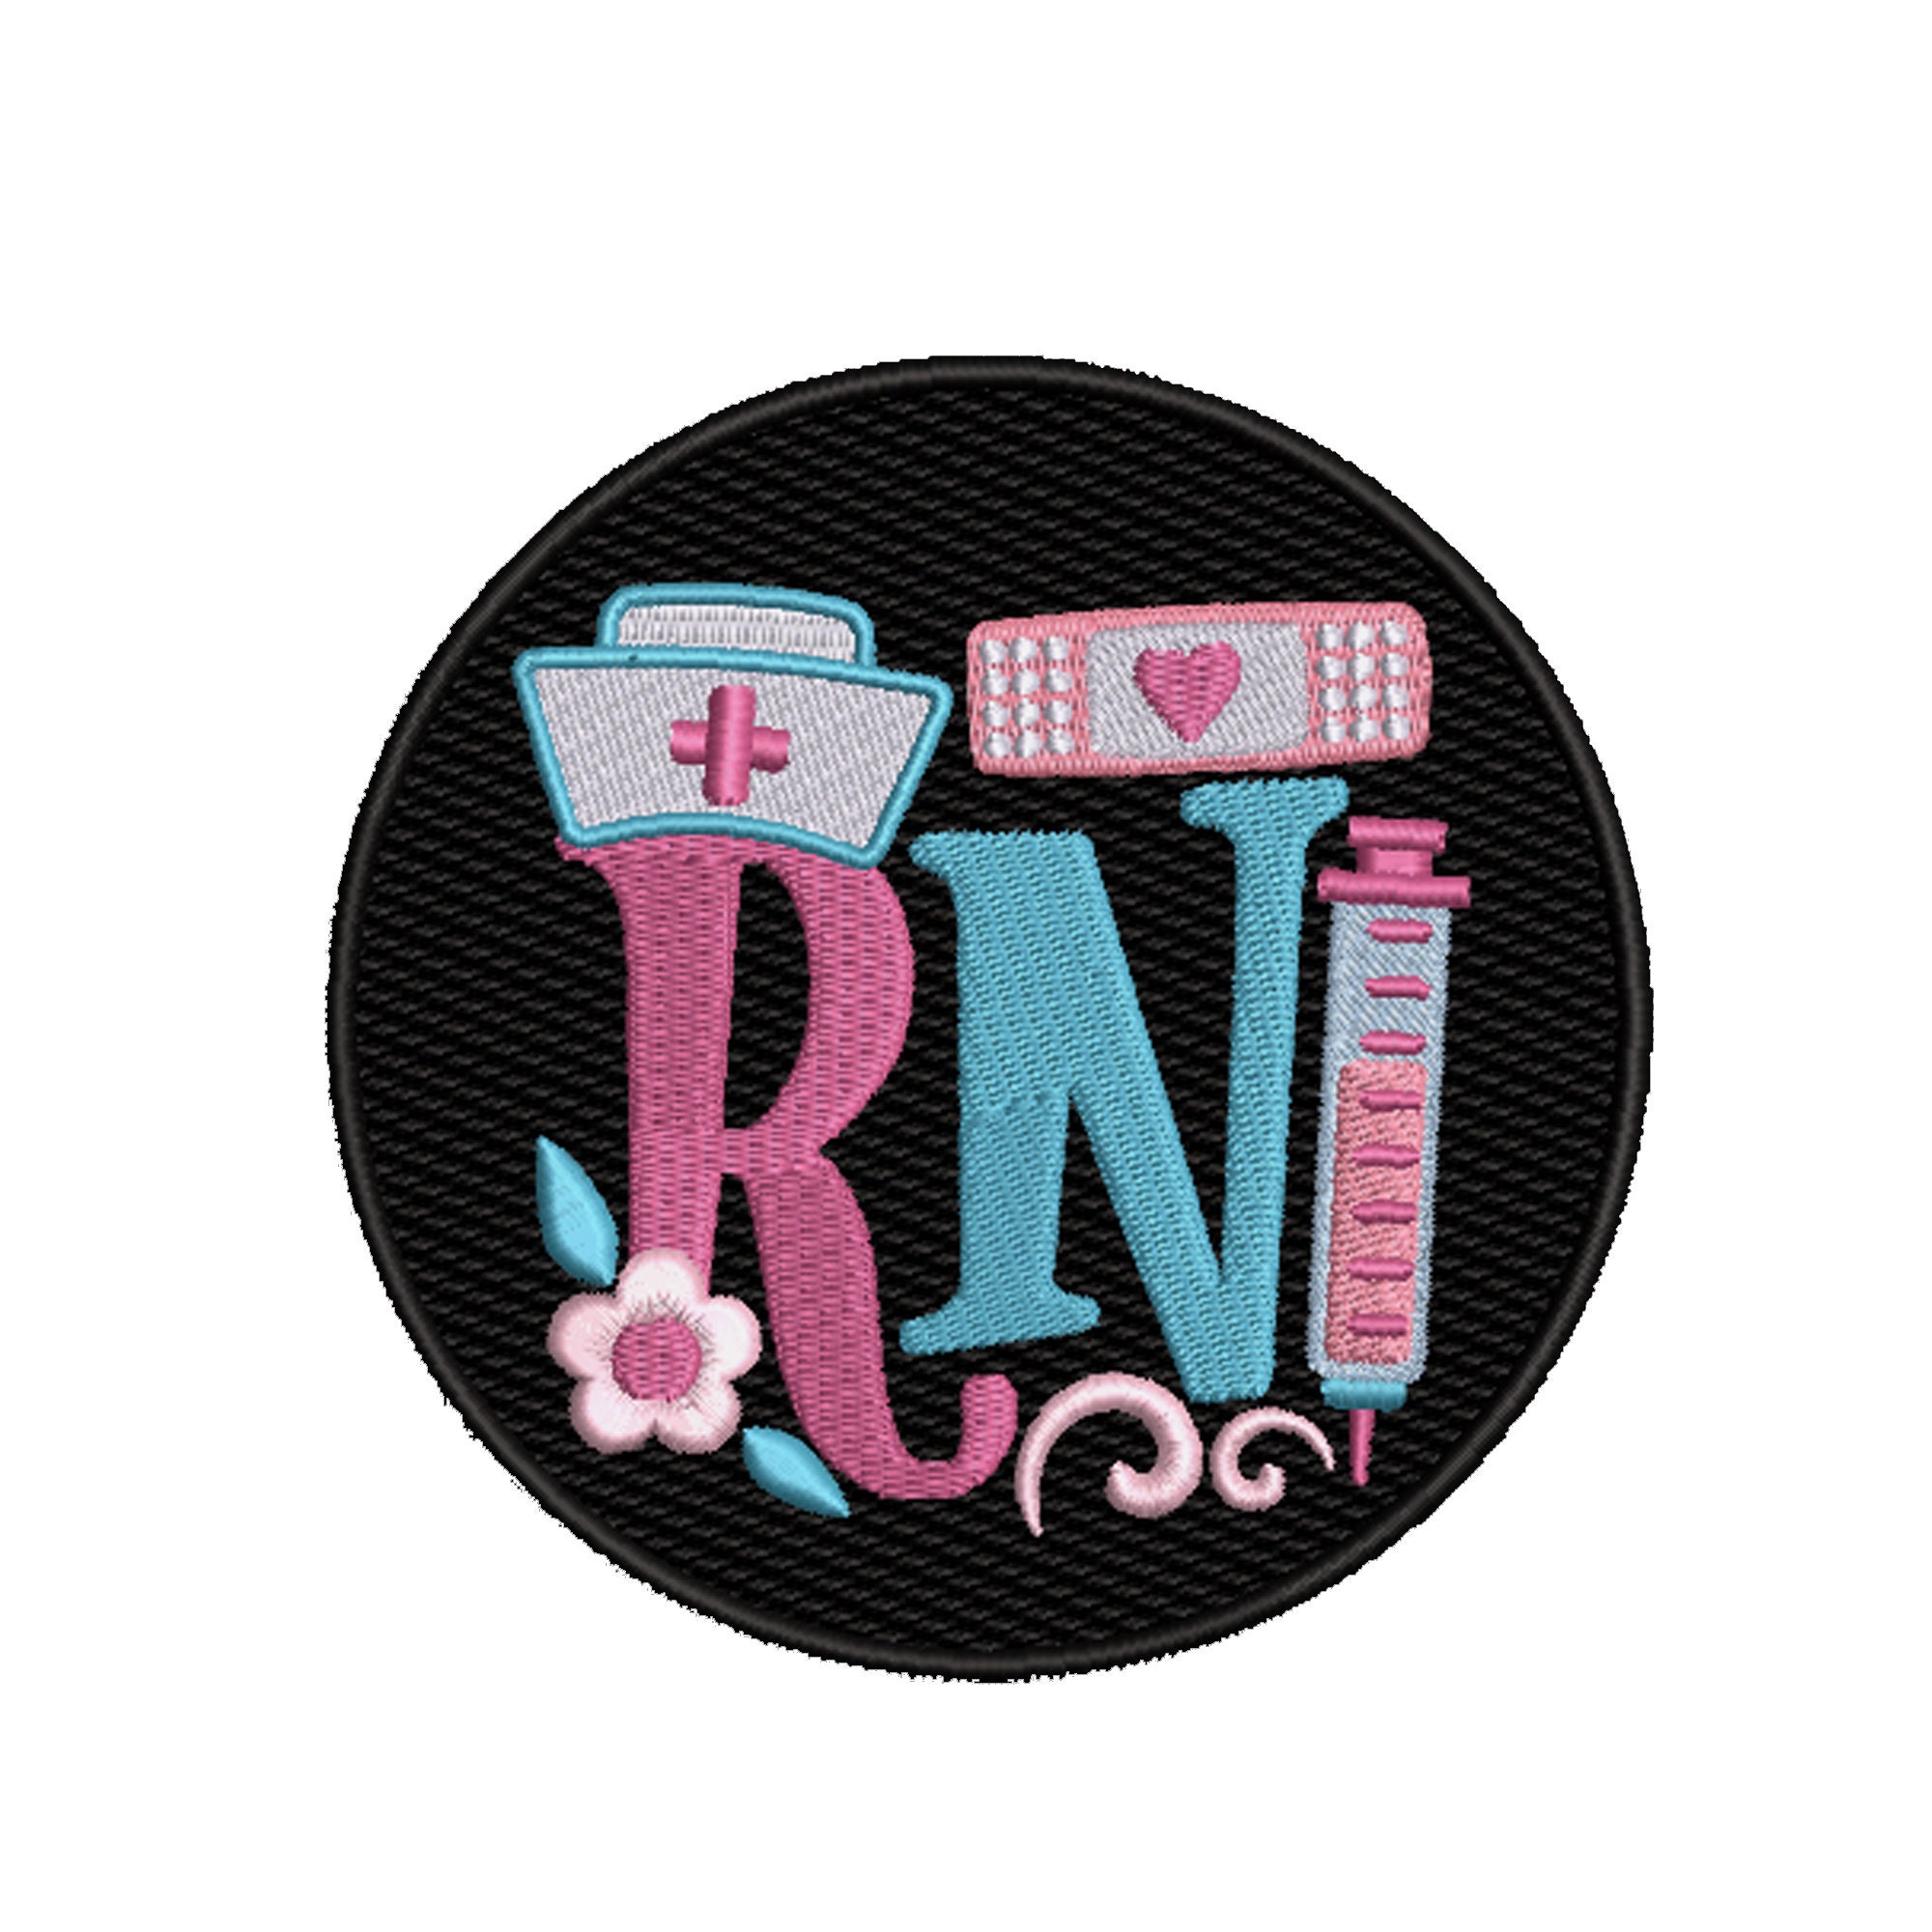 Medical Embroidered Name Patch with Stethoscope – Cee Bee Stitches